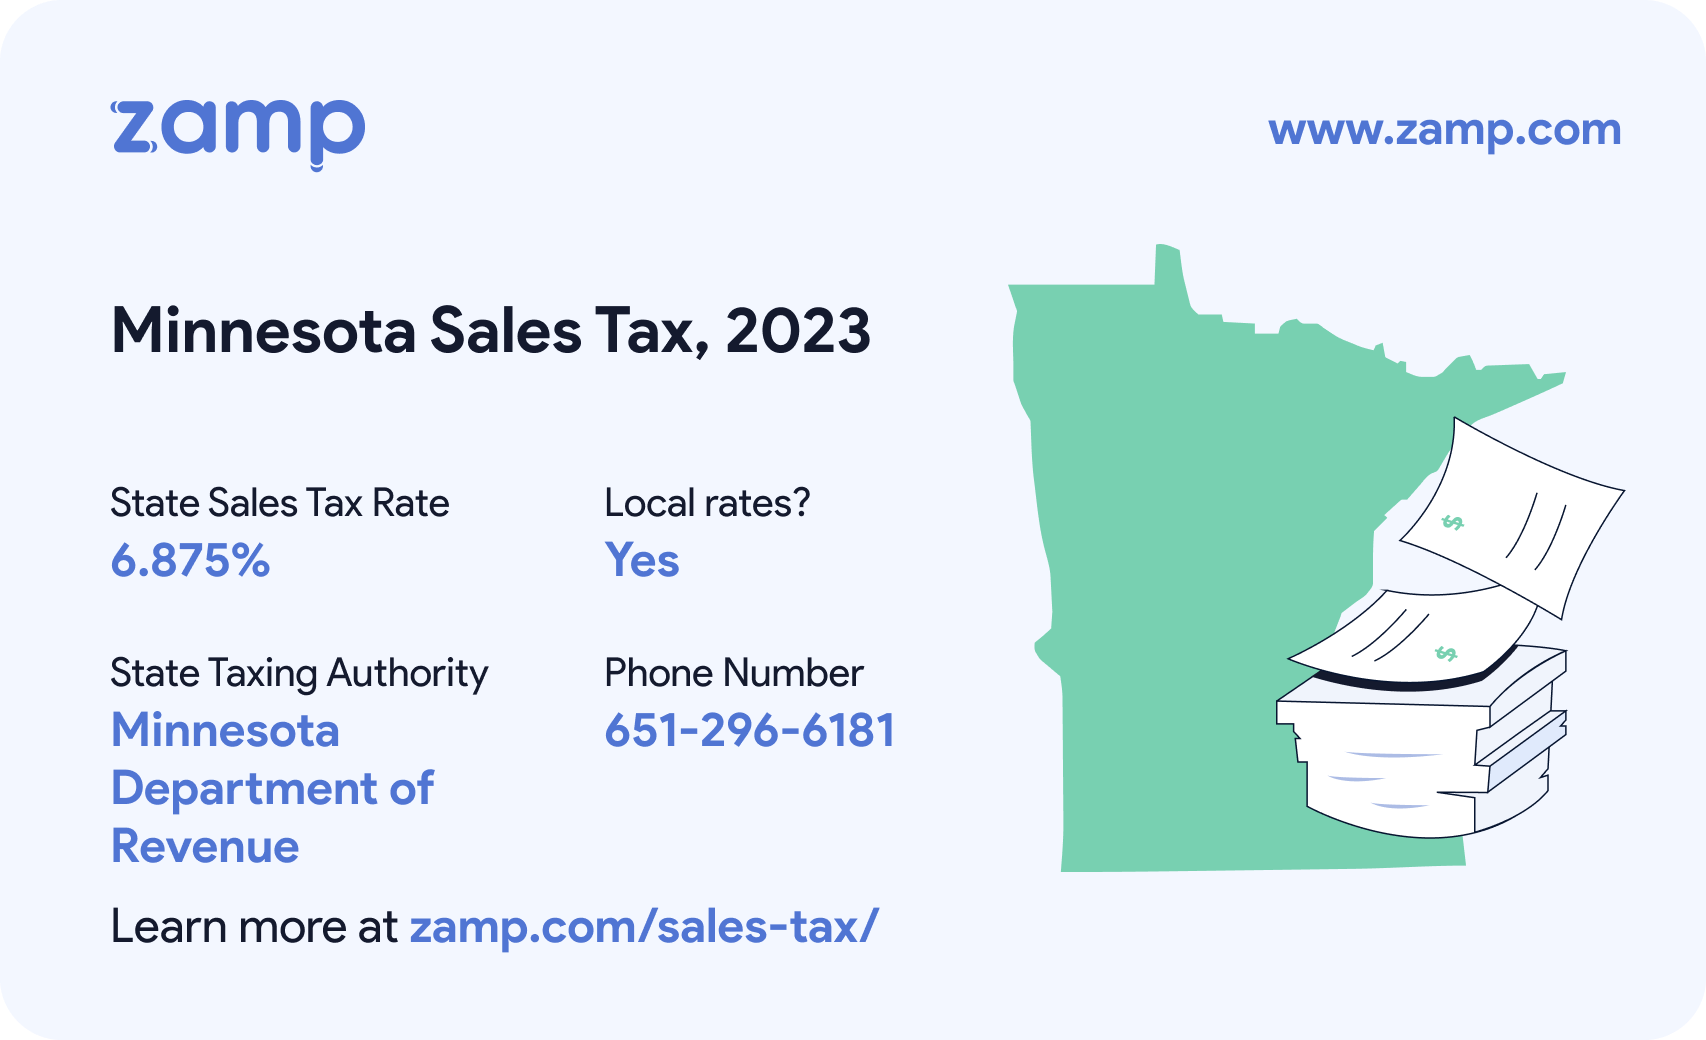 Minnesota basic sales tax info for 2023 - State sales tax rate: 6.875%, Local rates? Yes; State Taxing Authority: Minnesota Department of Revenue; and phone number 651-296-6181